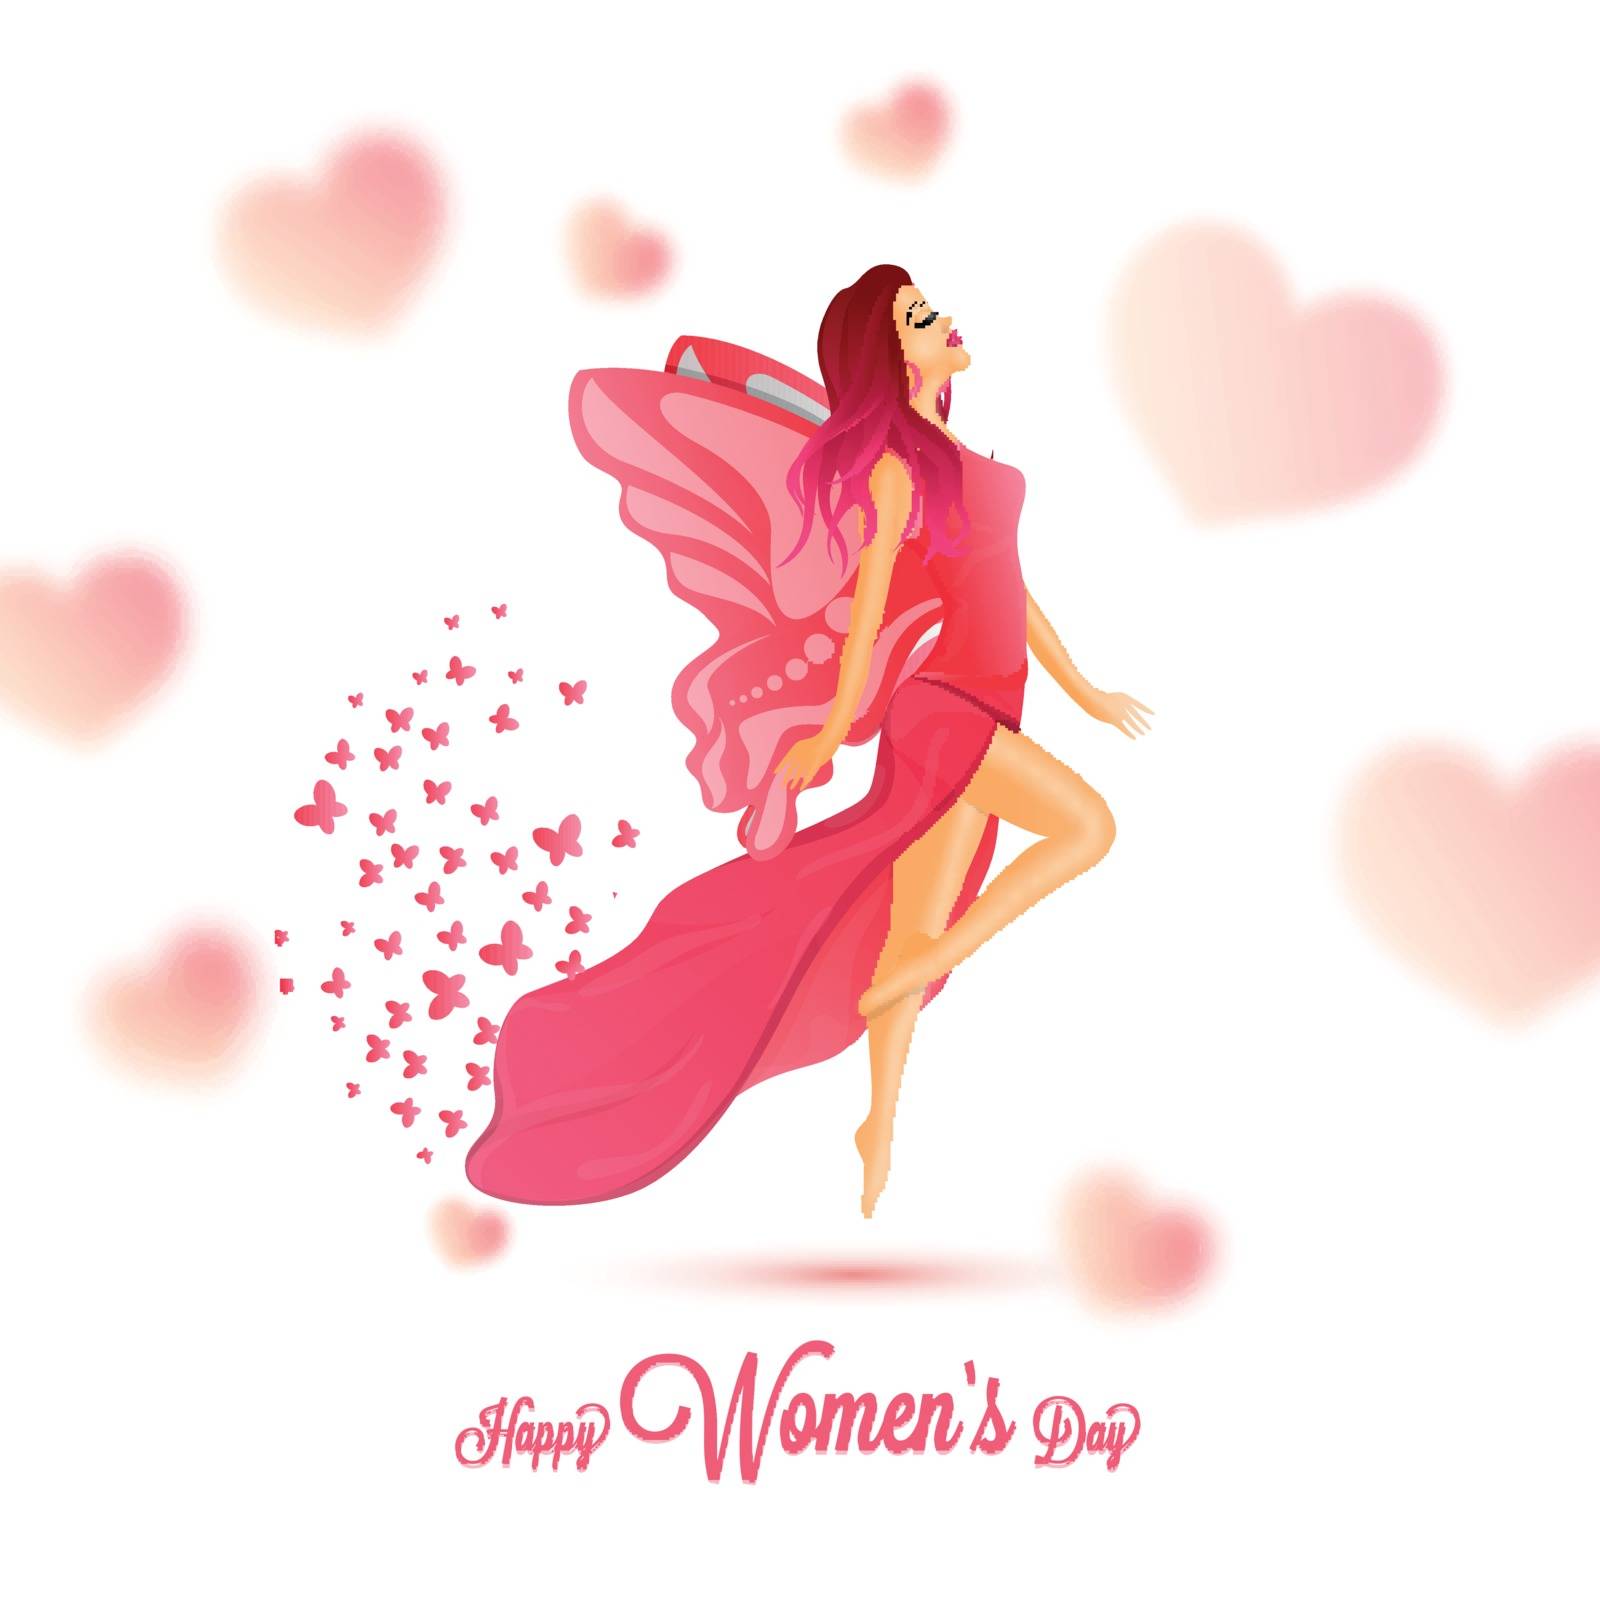 Happy Women's Day celebration greeting card design, illustration of young girl on blurred background.